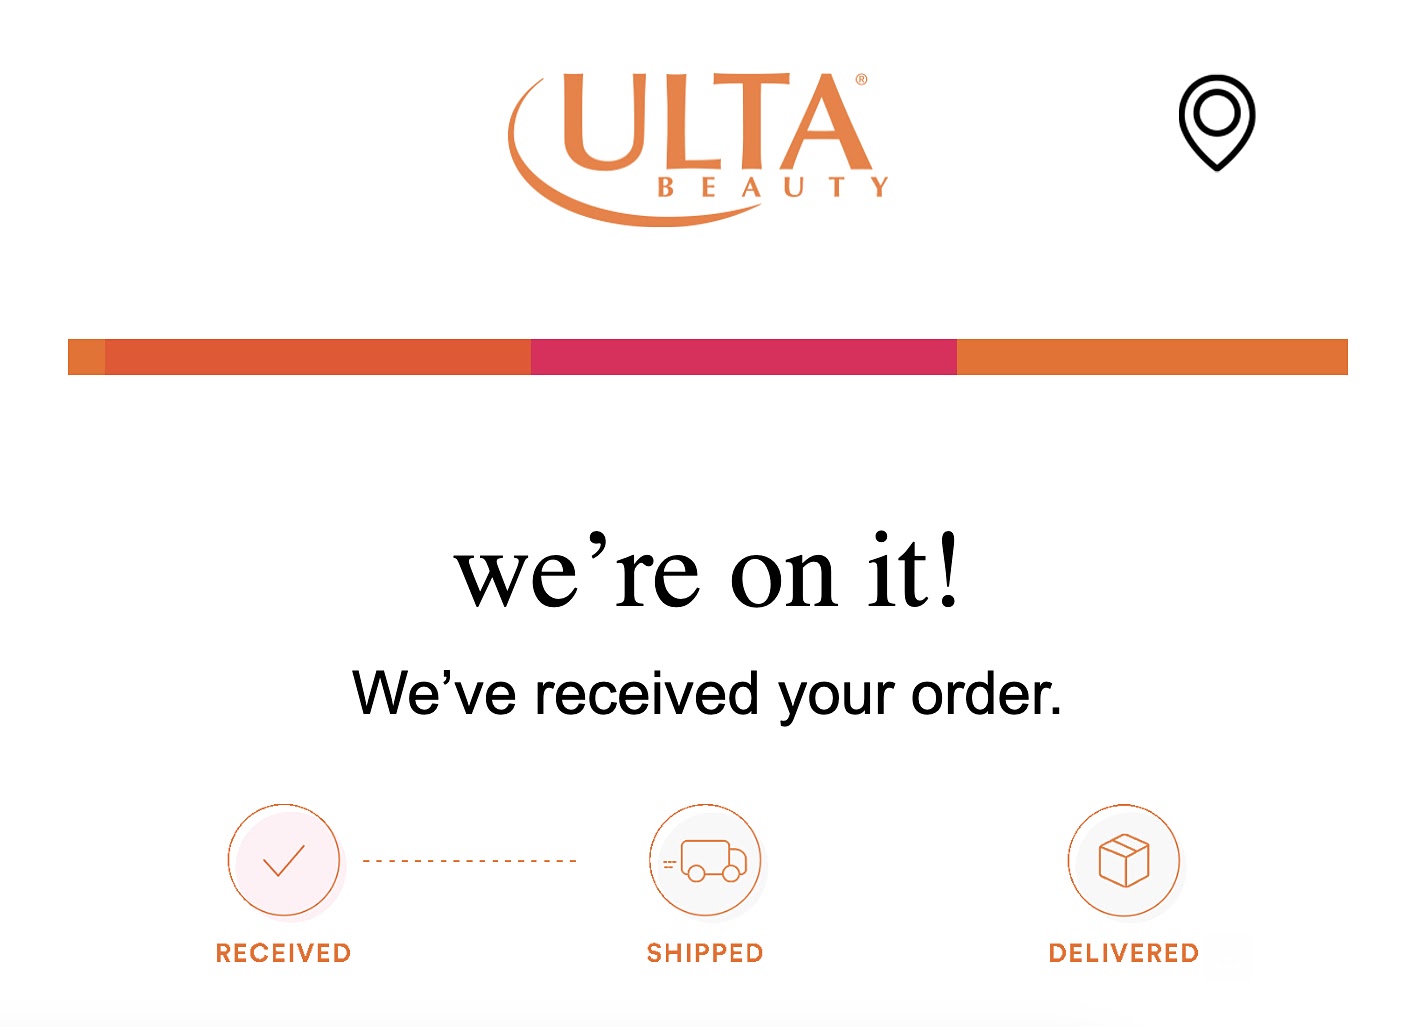 Ulta Beauty's email letting users know know they’ve received their order